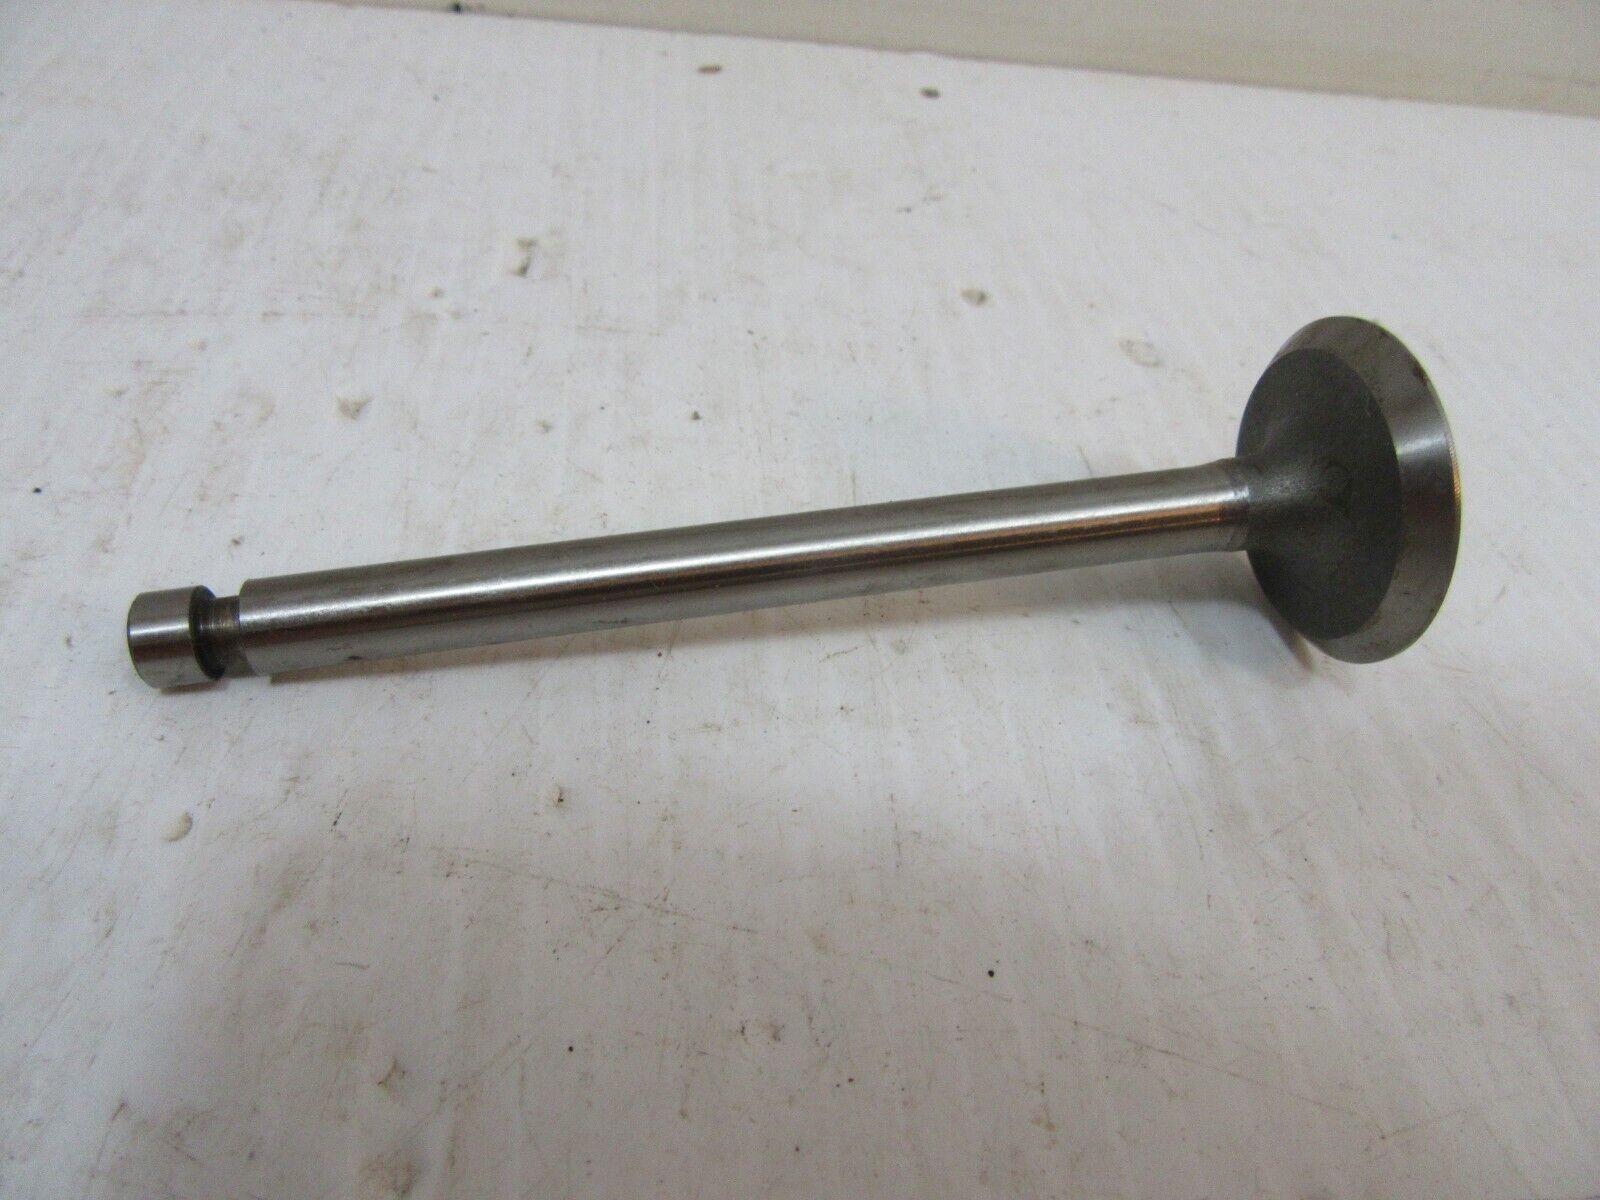 5 TRW V1854 NORS Intake Valves WILLYS: LARK FALCON JEEPSTER & MORE 1948-1951